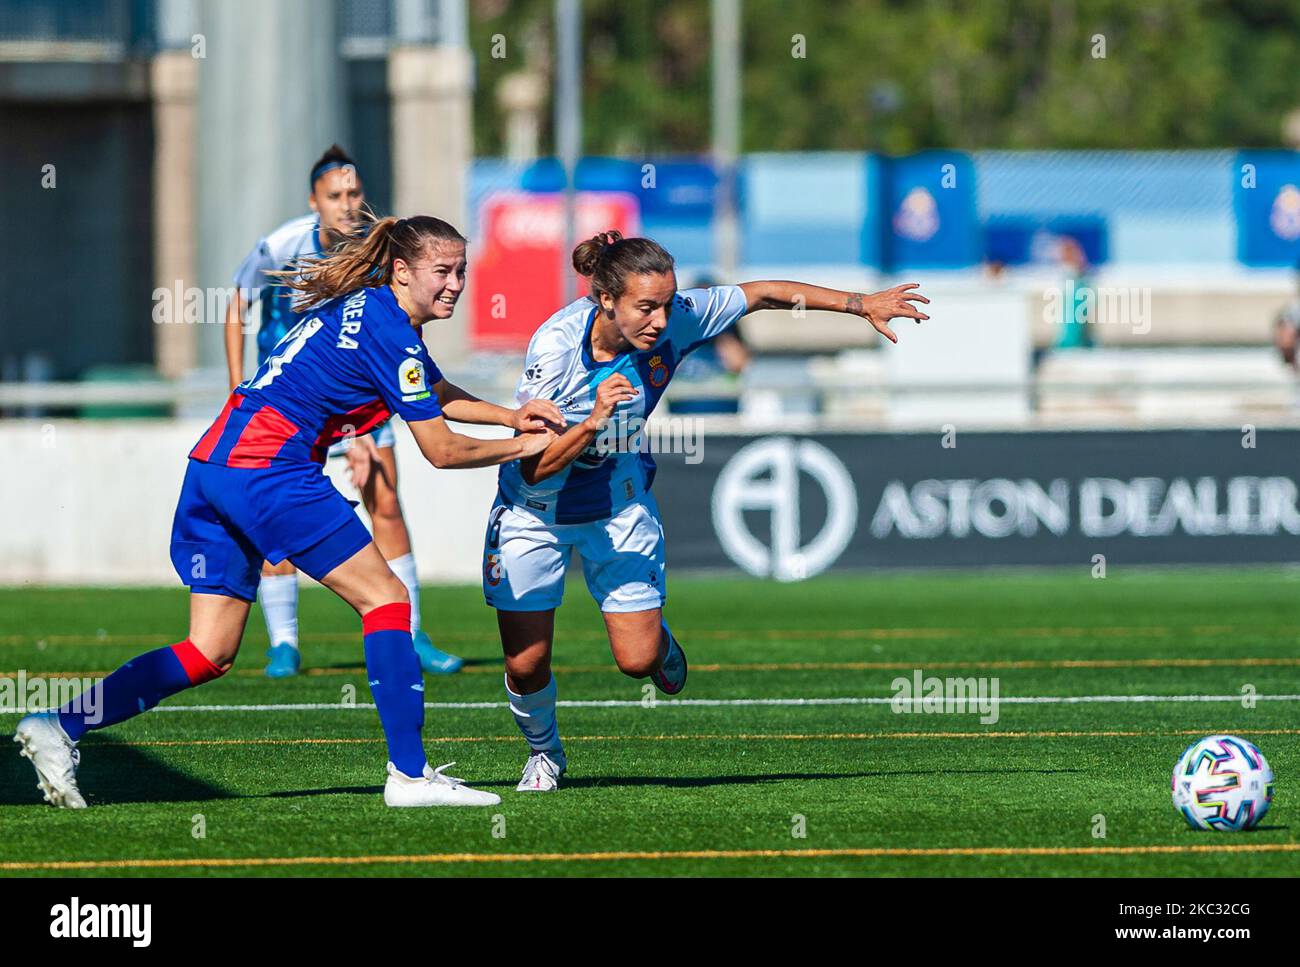 Carla morera and Anair during the match between RCD Espanyol and SD Eibar, corresponding to the week 4 of the Liga Primera Iberdrola, played at the Dani Jarque Sports City , on October 30, 2020 in Barcelona, Spain. (Photo by Xavier Ballart/Urbanandsport/NurPhoto) Stock Photo